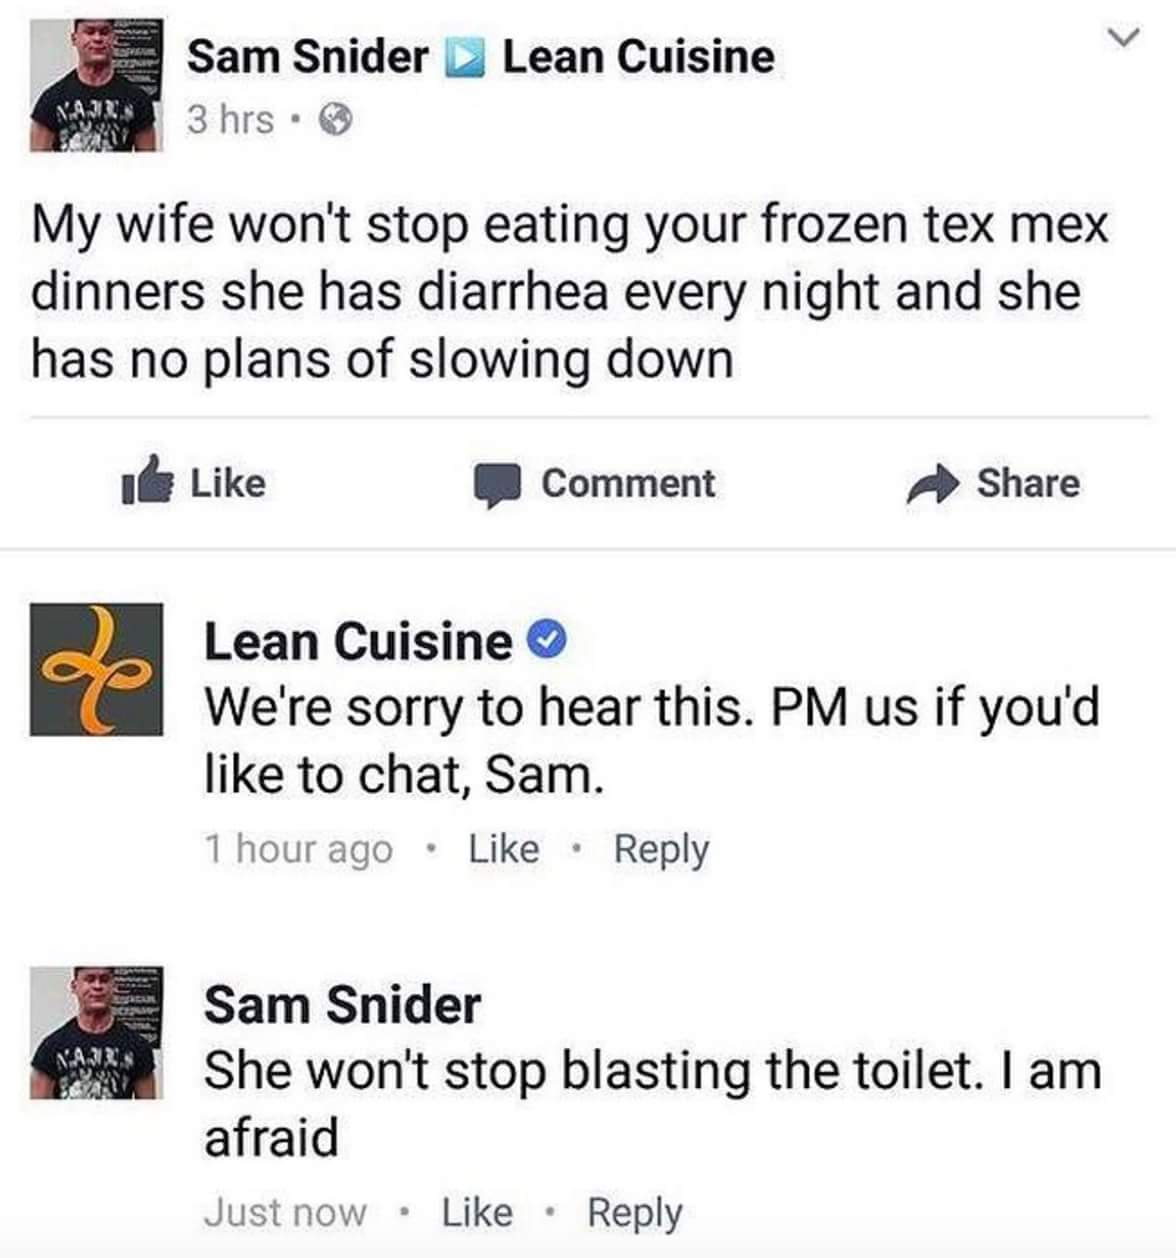 web page - Lean Cuisine Sam Snider 3 hrs. My wife won't stop eating your frozen tex mex dinners she has diarrhea every night and she has no plans of slowing down 0 Comment Lean Cuisine We're sorry to hear this. Pm us if you'd to chat, Sam. 1 hour ago Sam 